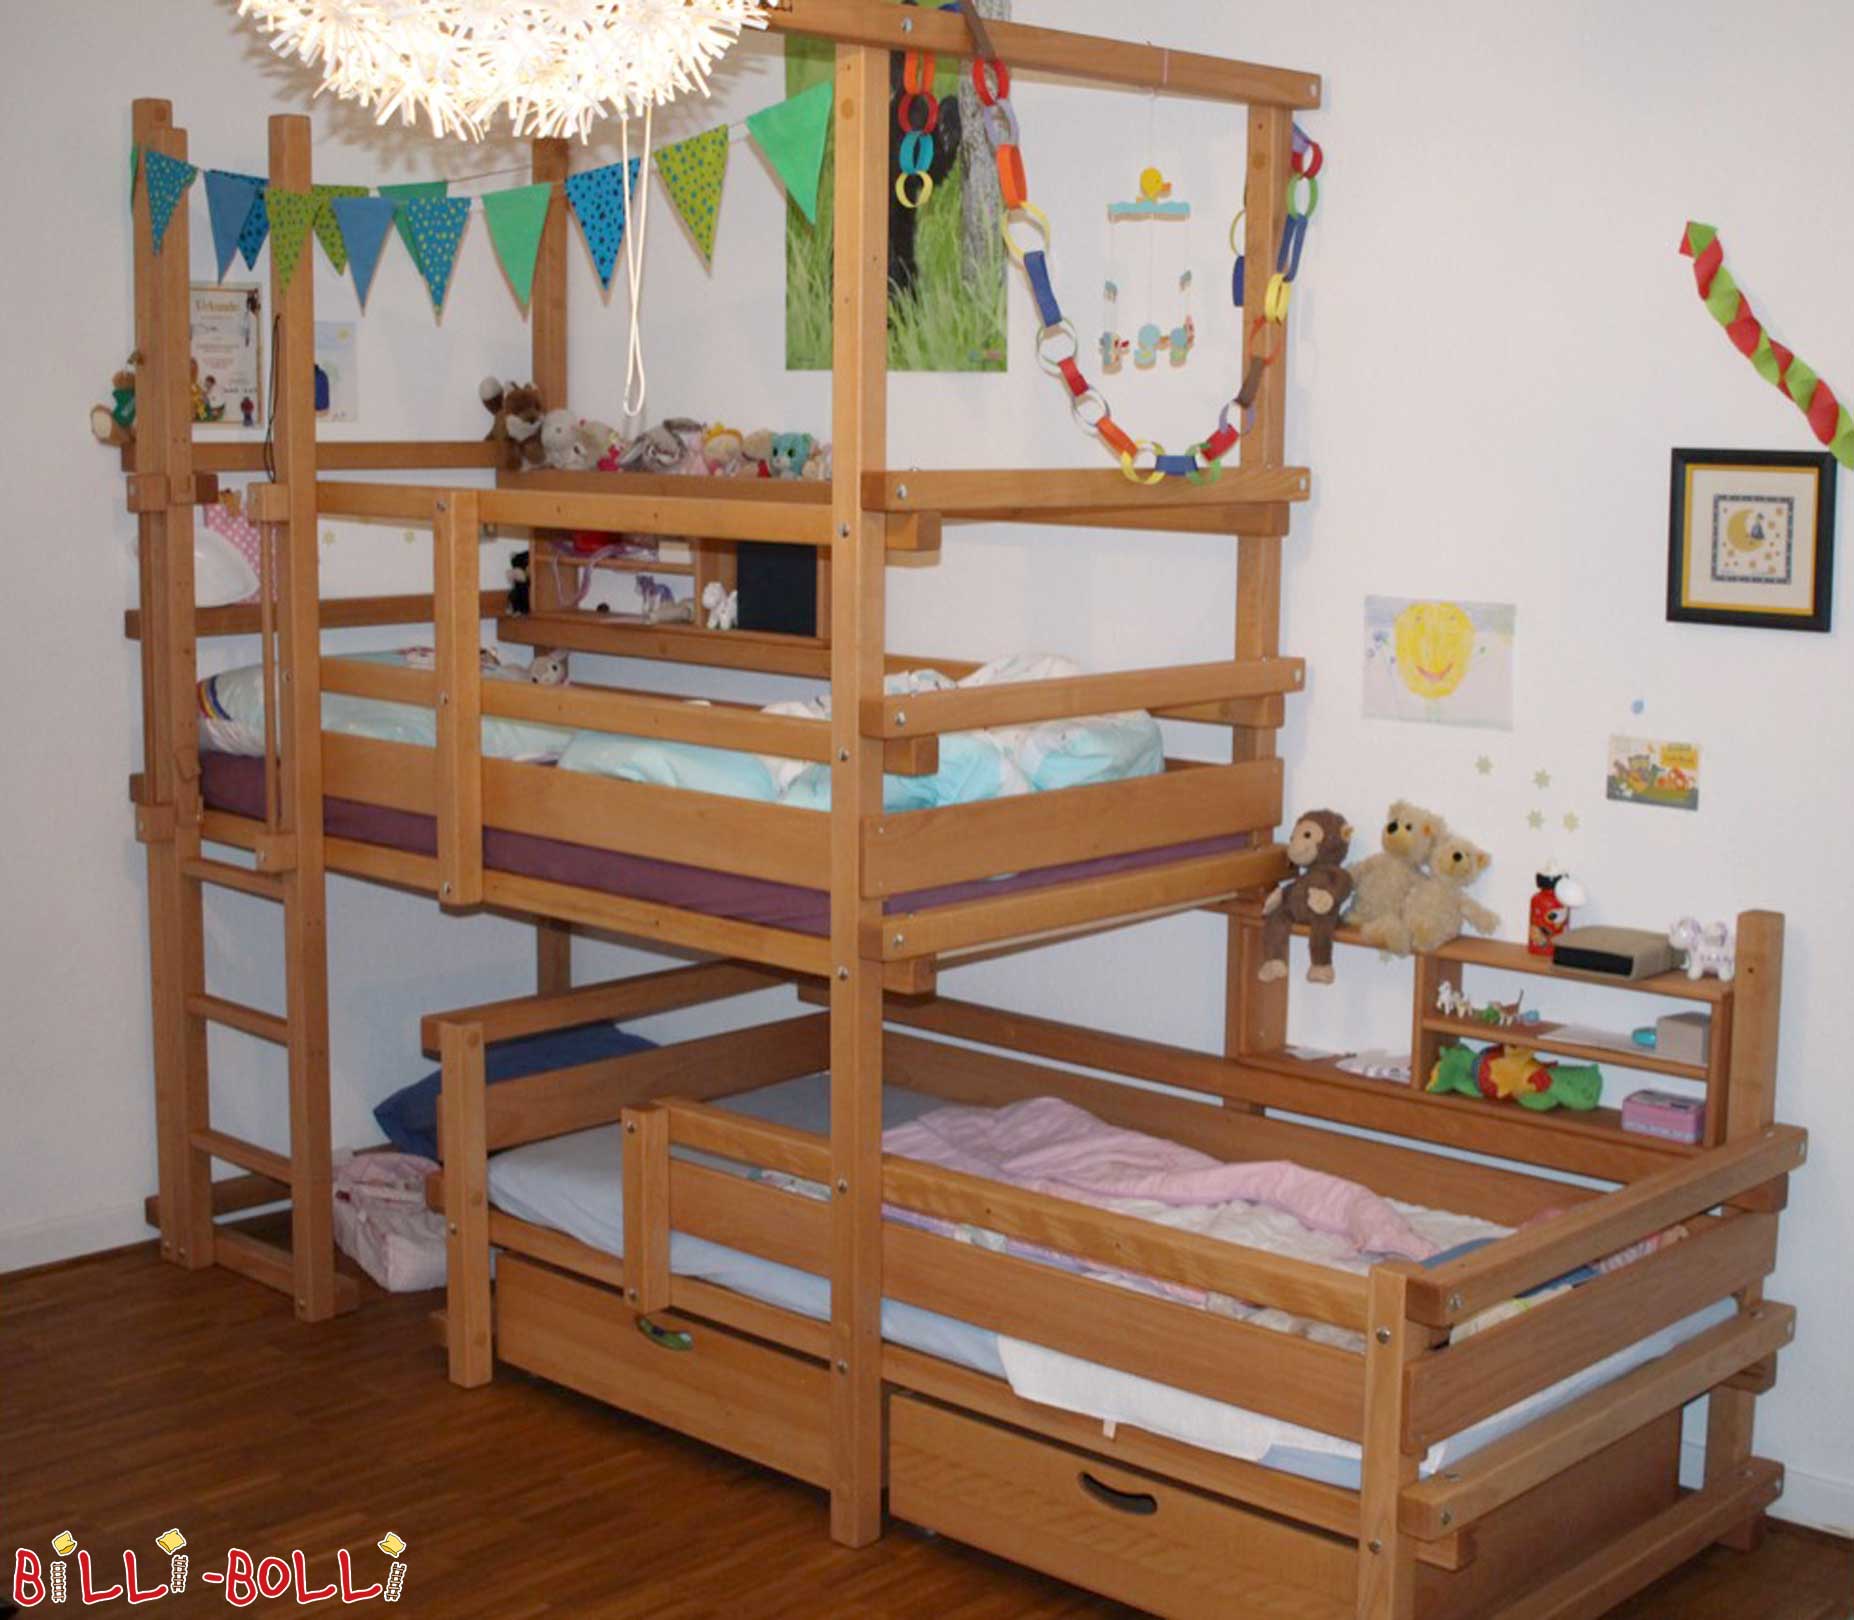 Laterally staggered bunk bed for 2 kids